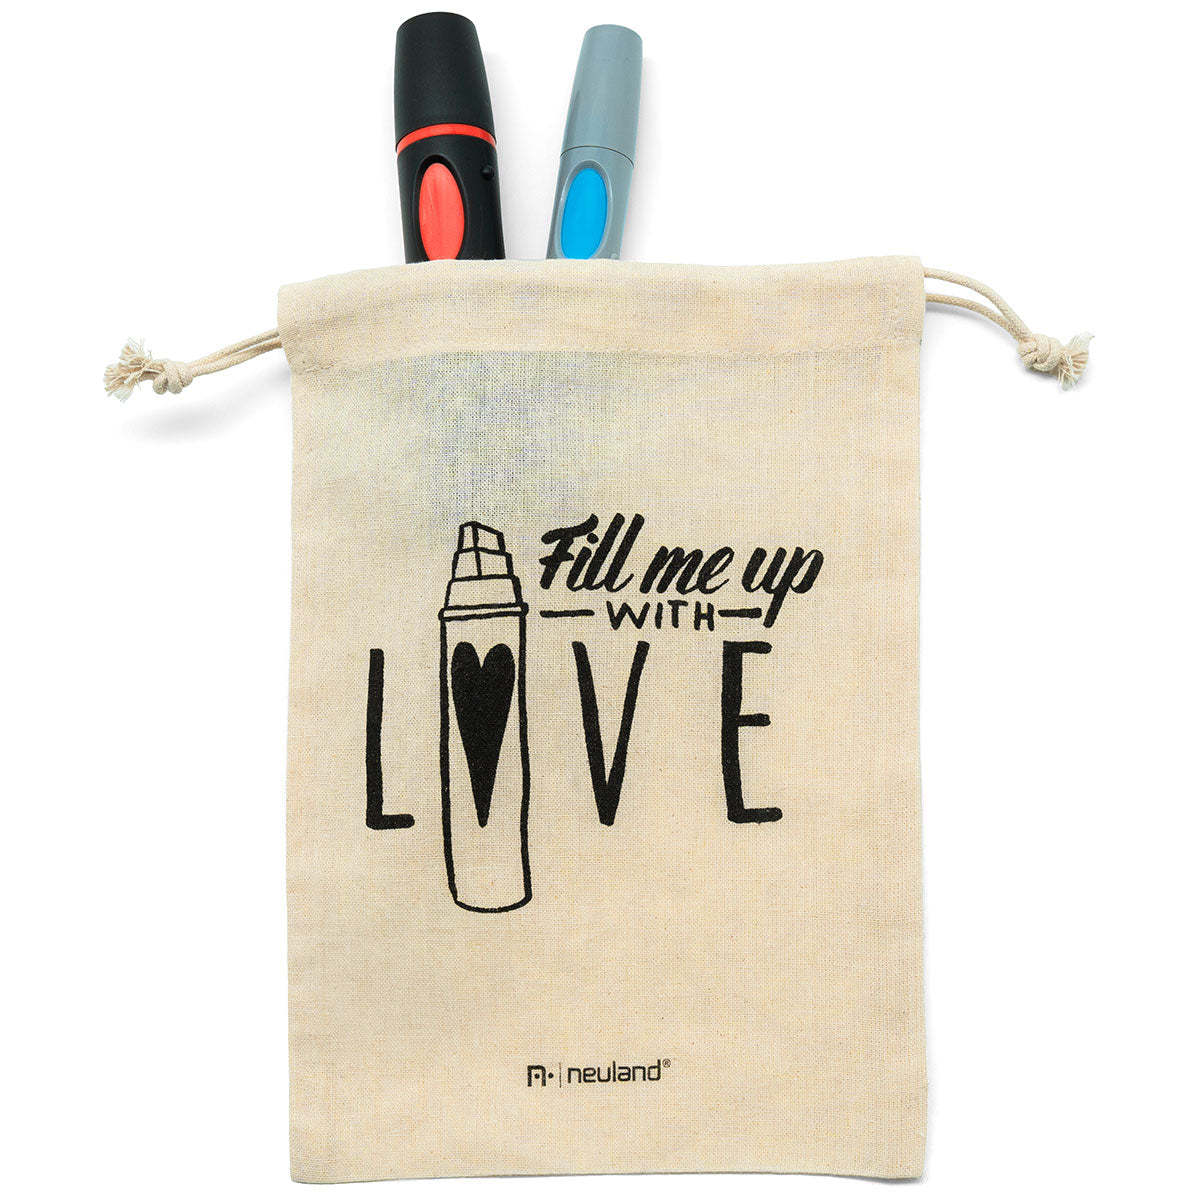 Fill me up with LOVE – Bag